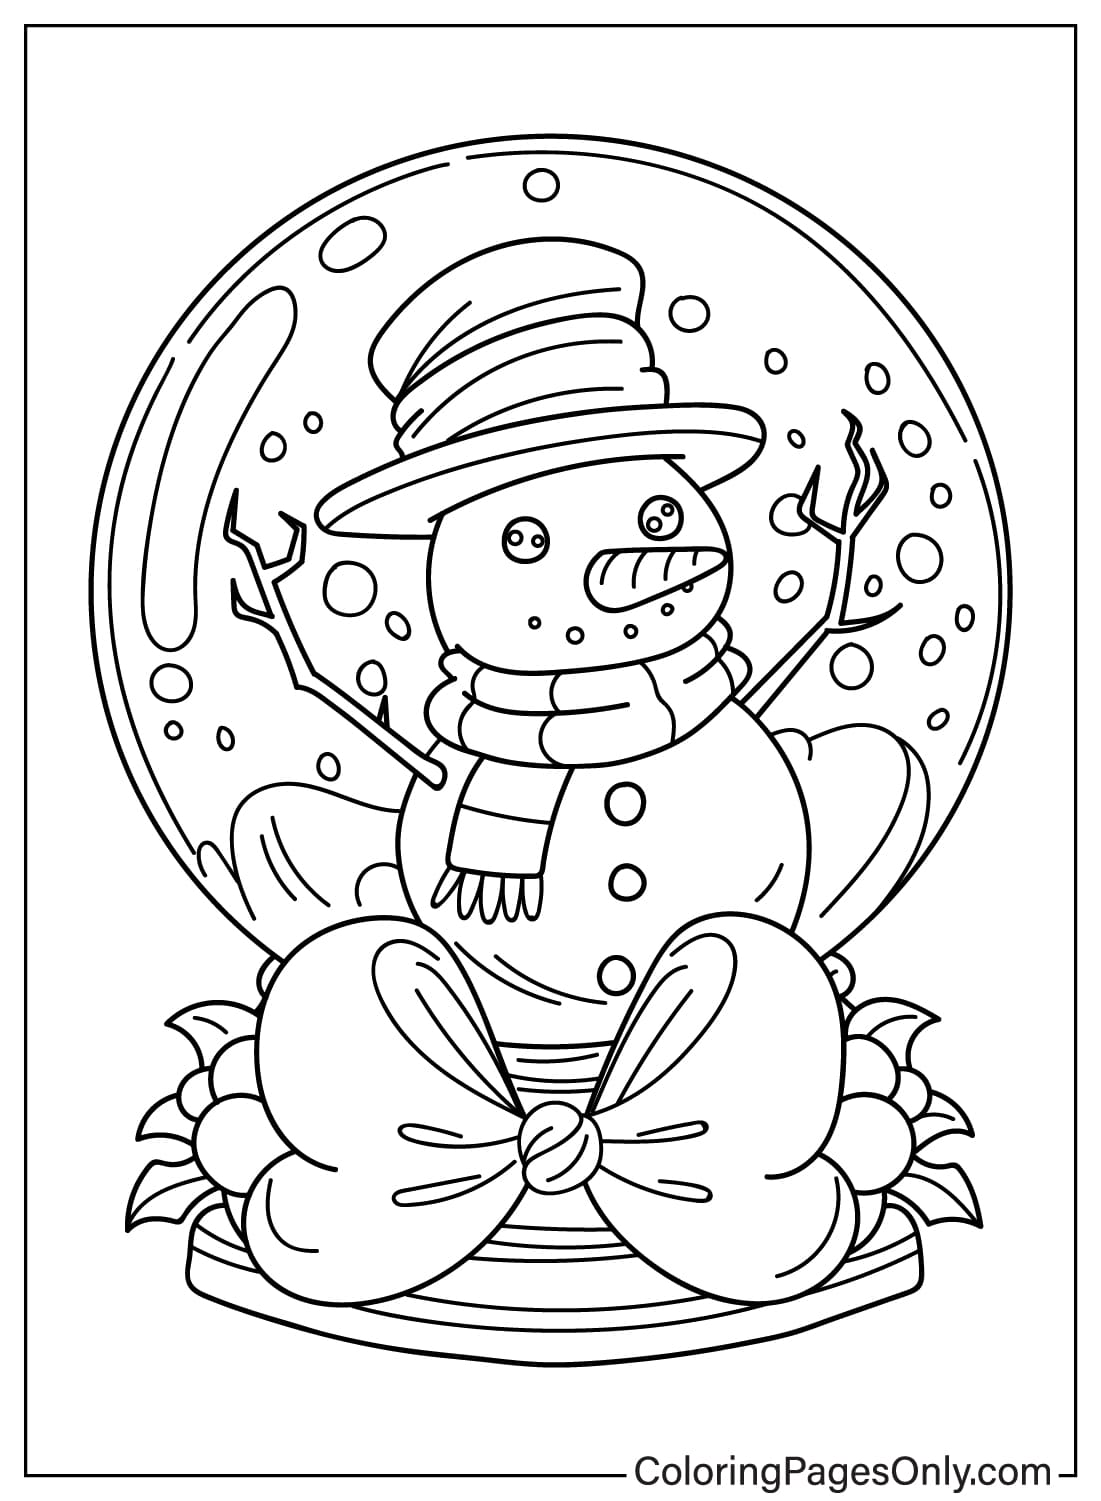 Free Printable Snow Globe Coloring Page - Free Printable Coloring Pages